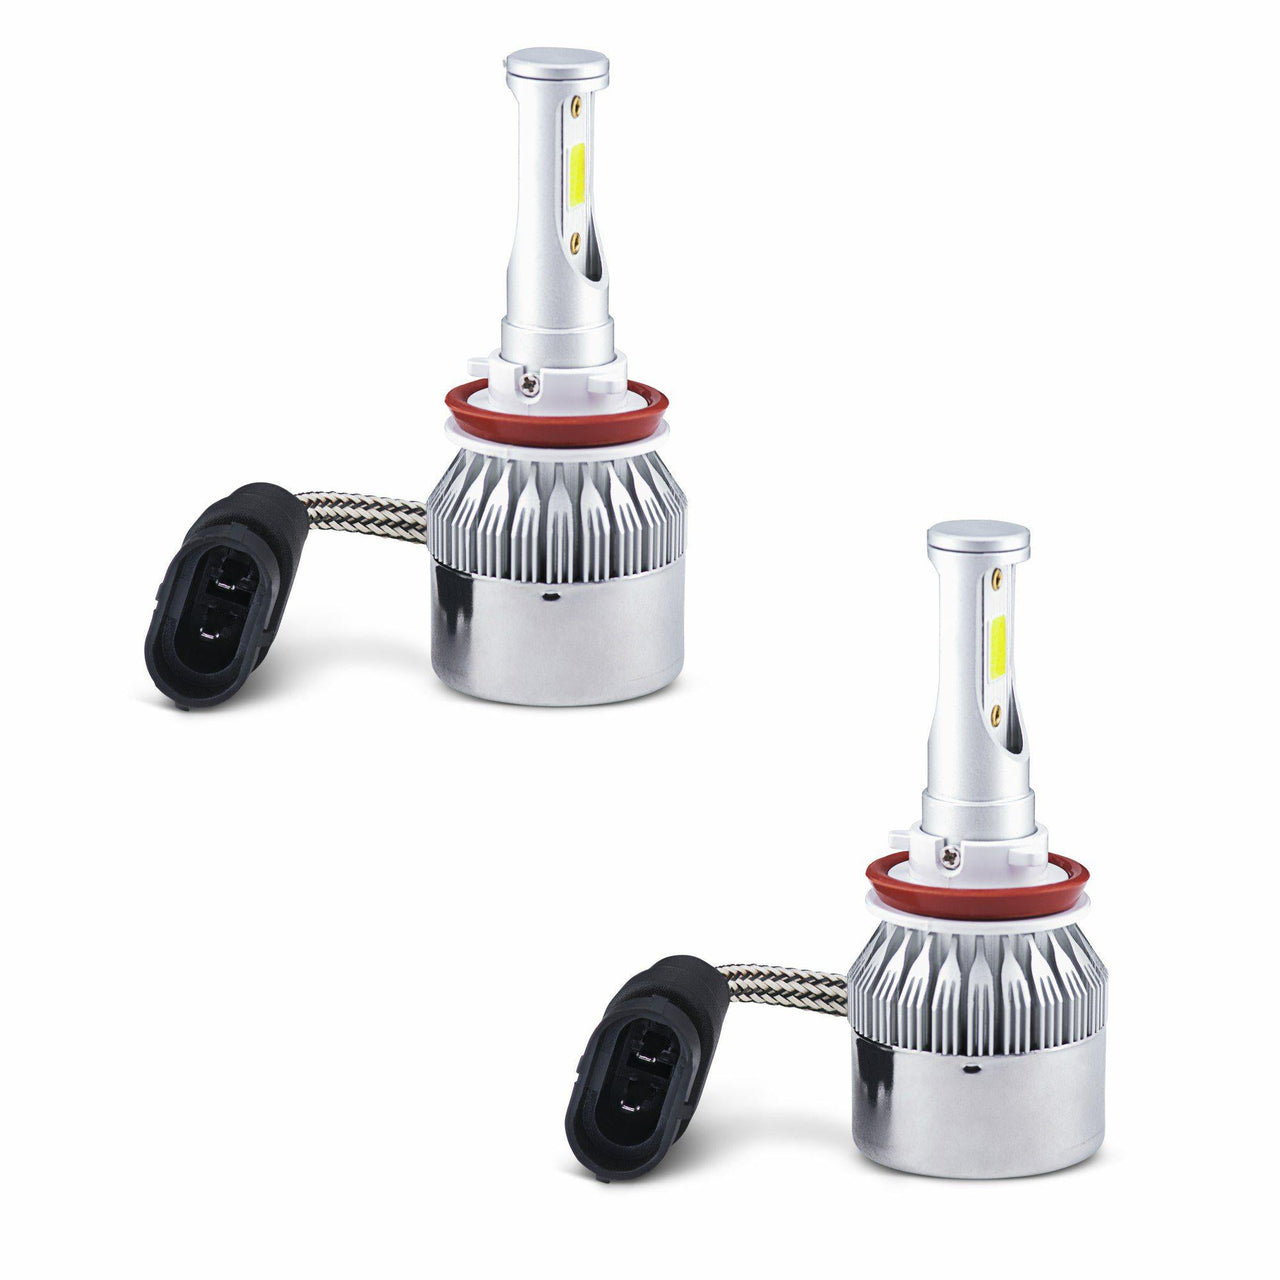 9012 LED Headlight Conversion Kit also know as HIR2